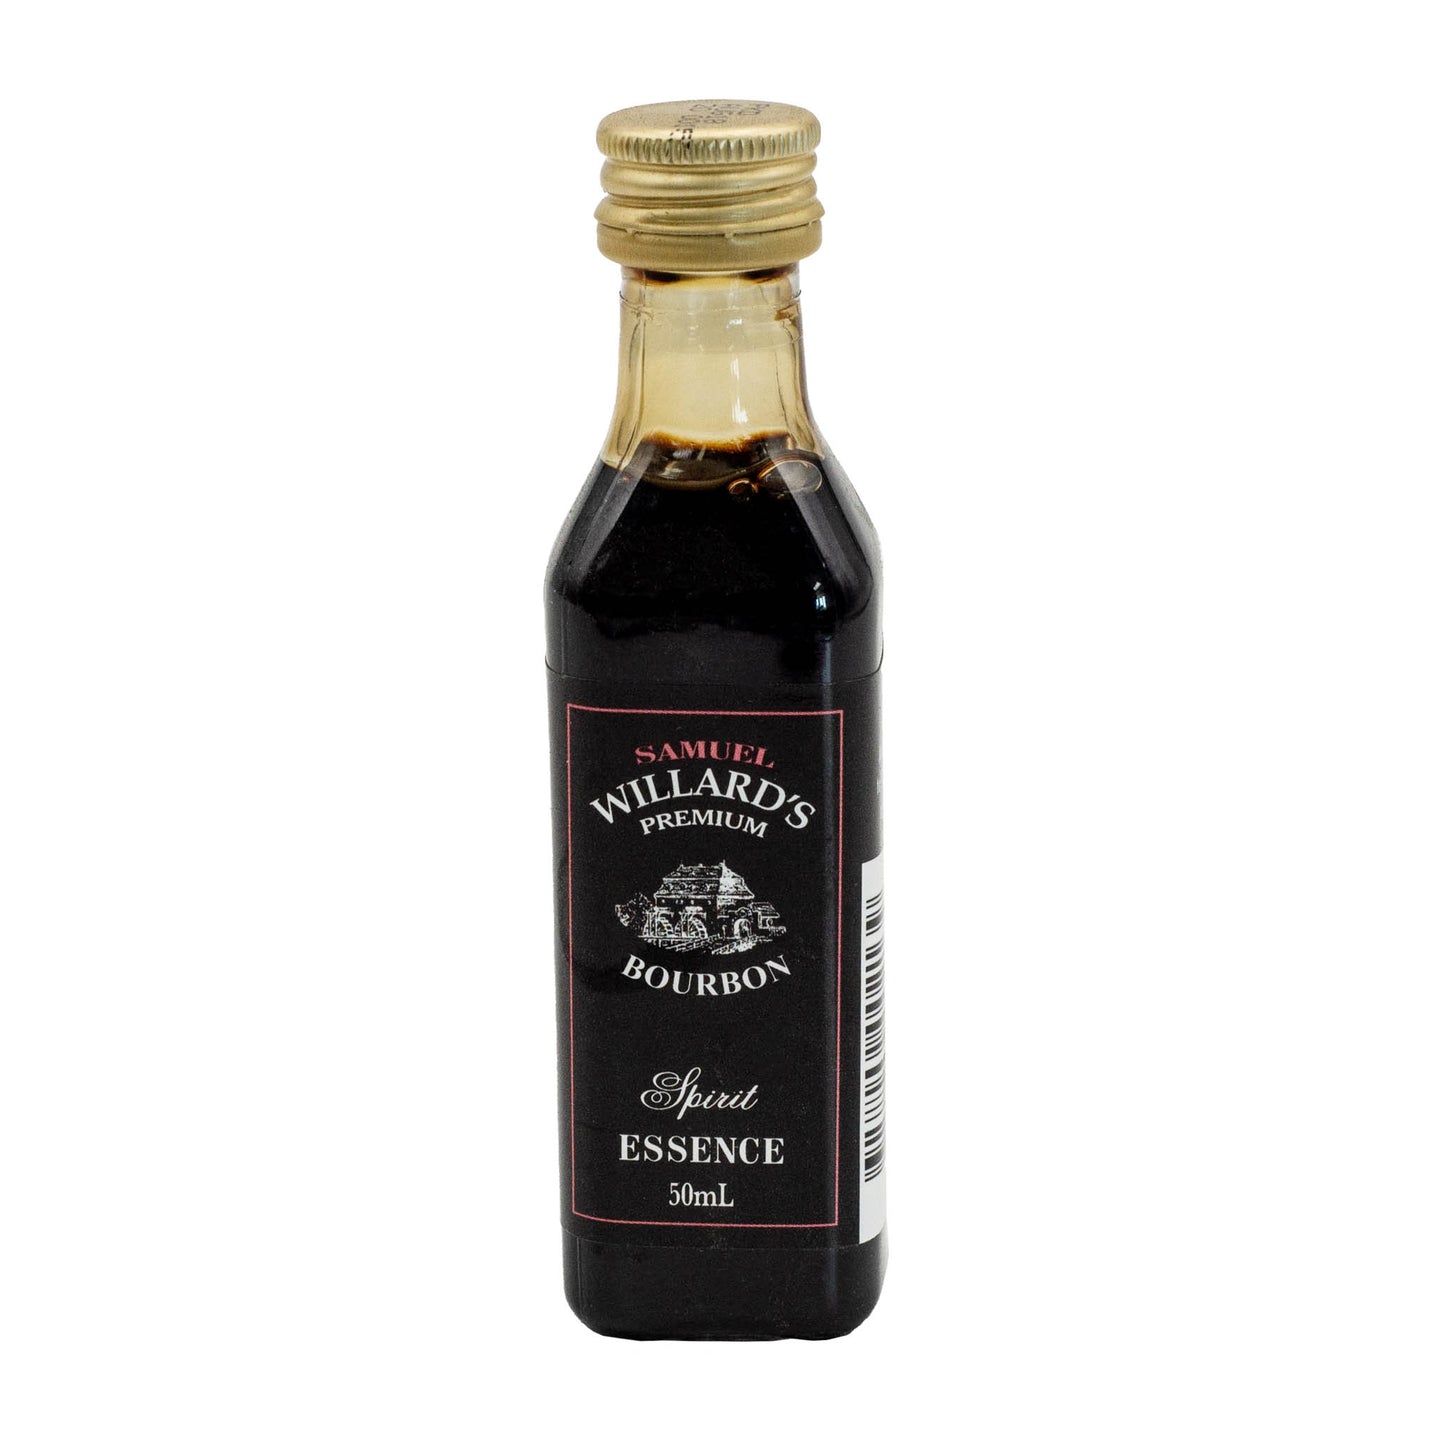 Samuel Willards Premium Bourbon essence makes a Jack Daniels style drink. Will make 2250mL of finished product from each 50mL bottle